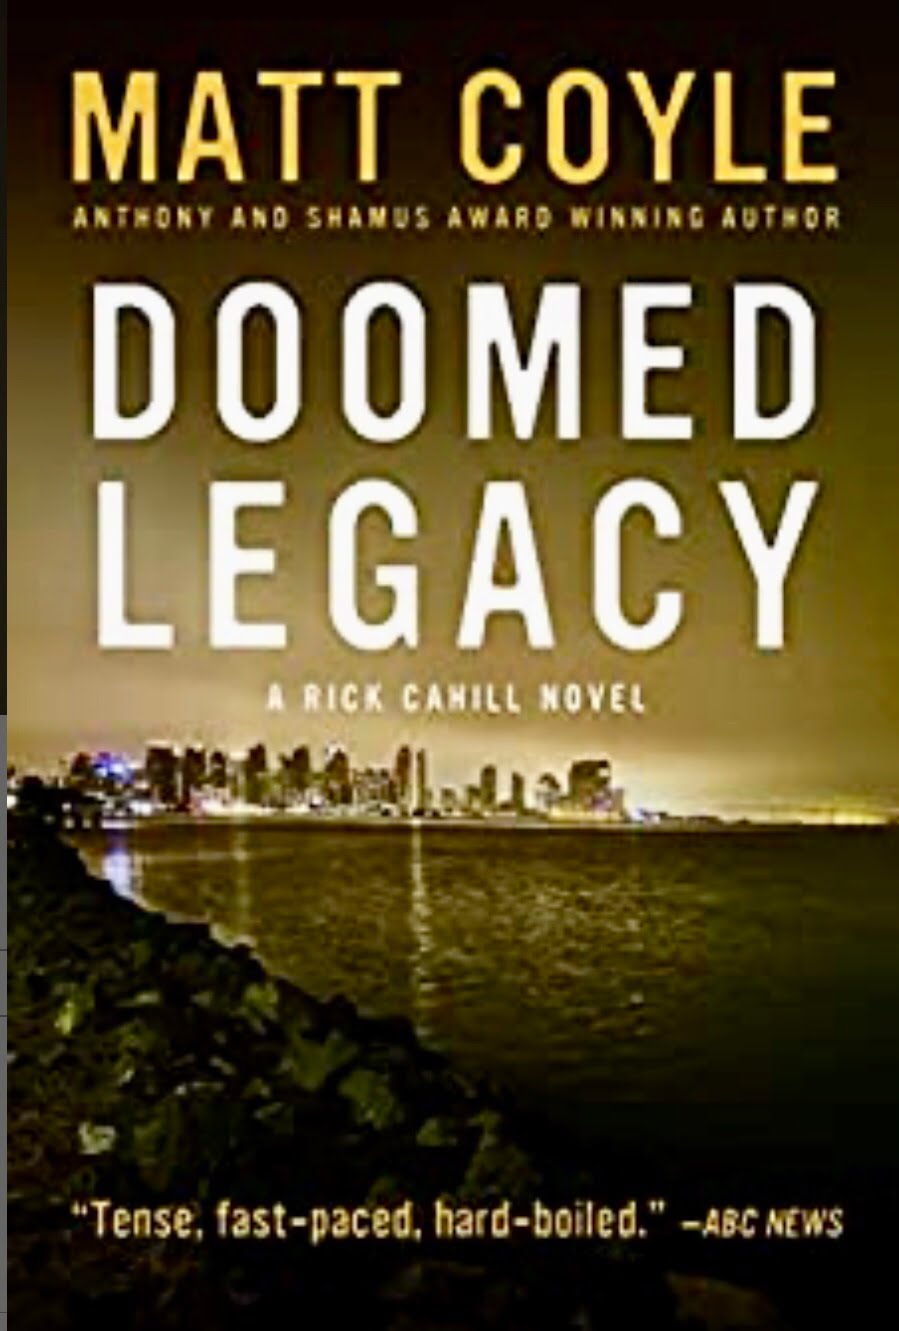 DOOMED LEGACY BY MATT COYLE – BOOK REVIEW